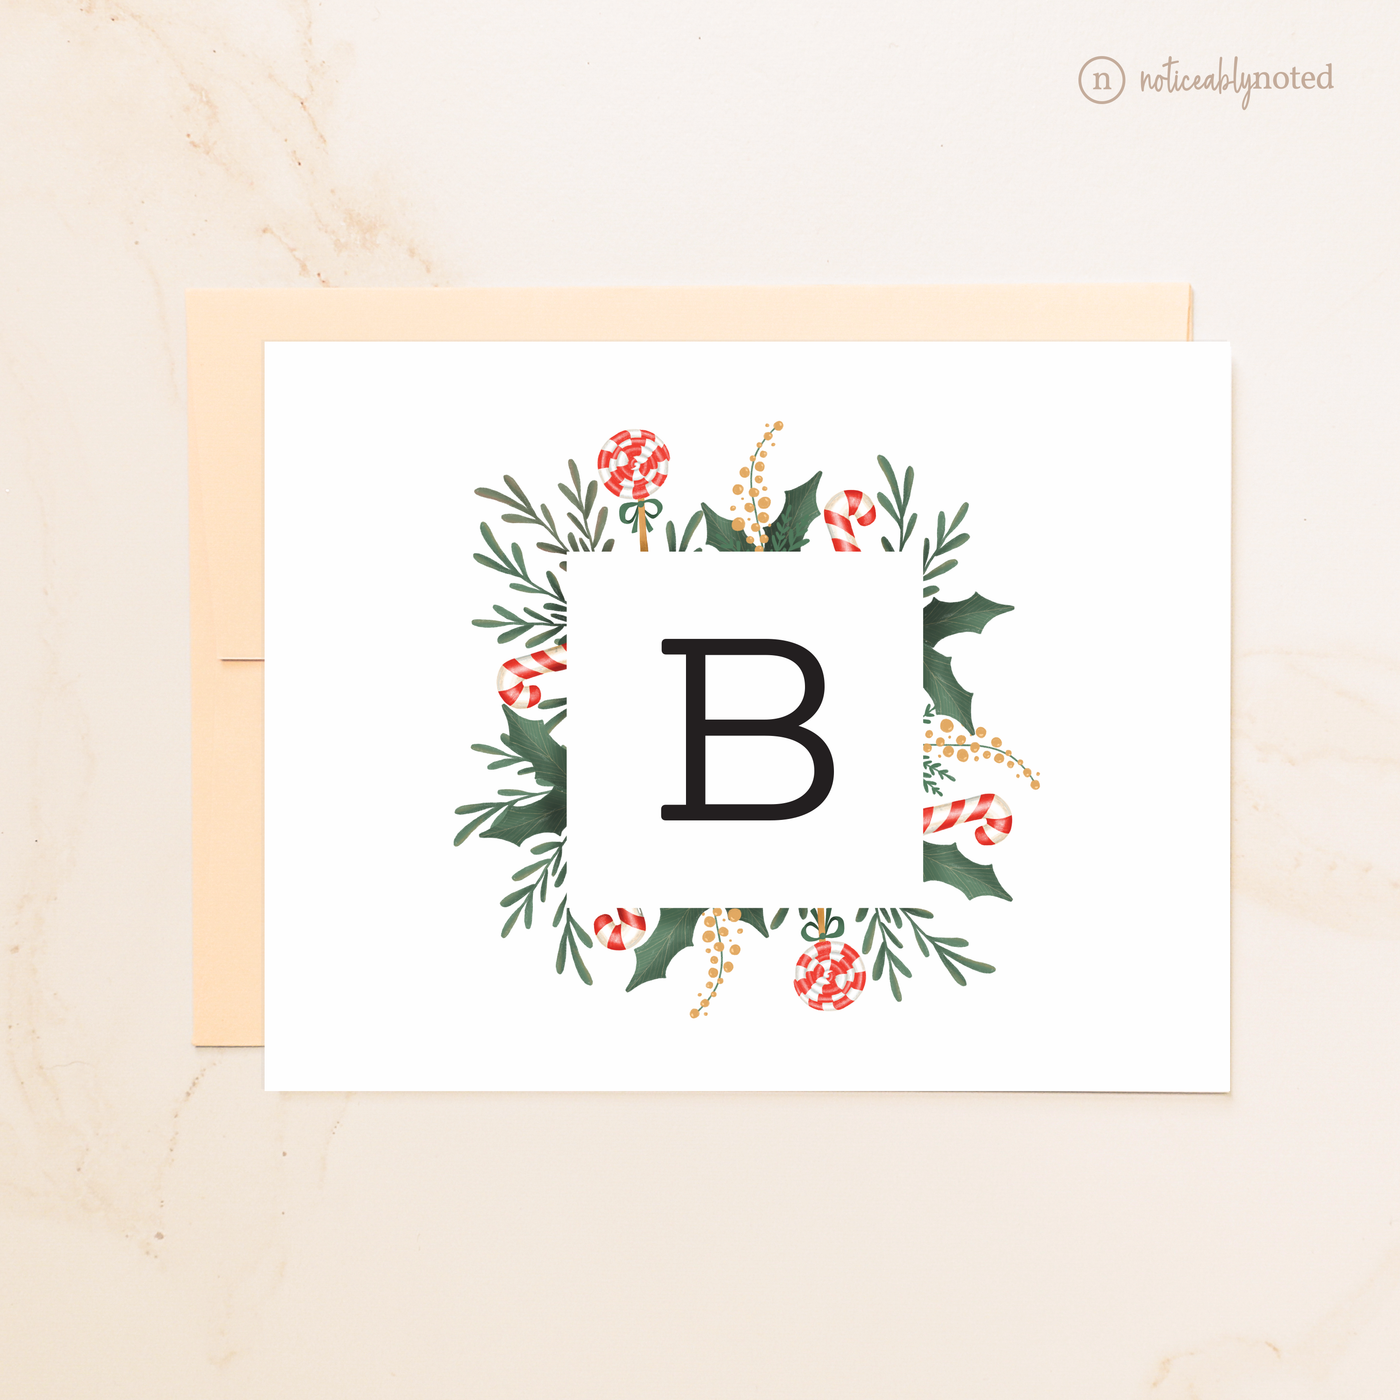 Peppermint Monogrammed Note Cards | Noticeably Noted